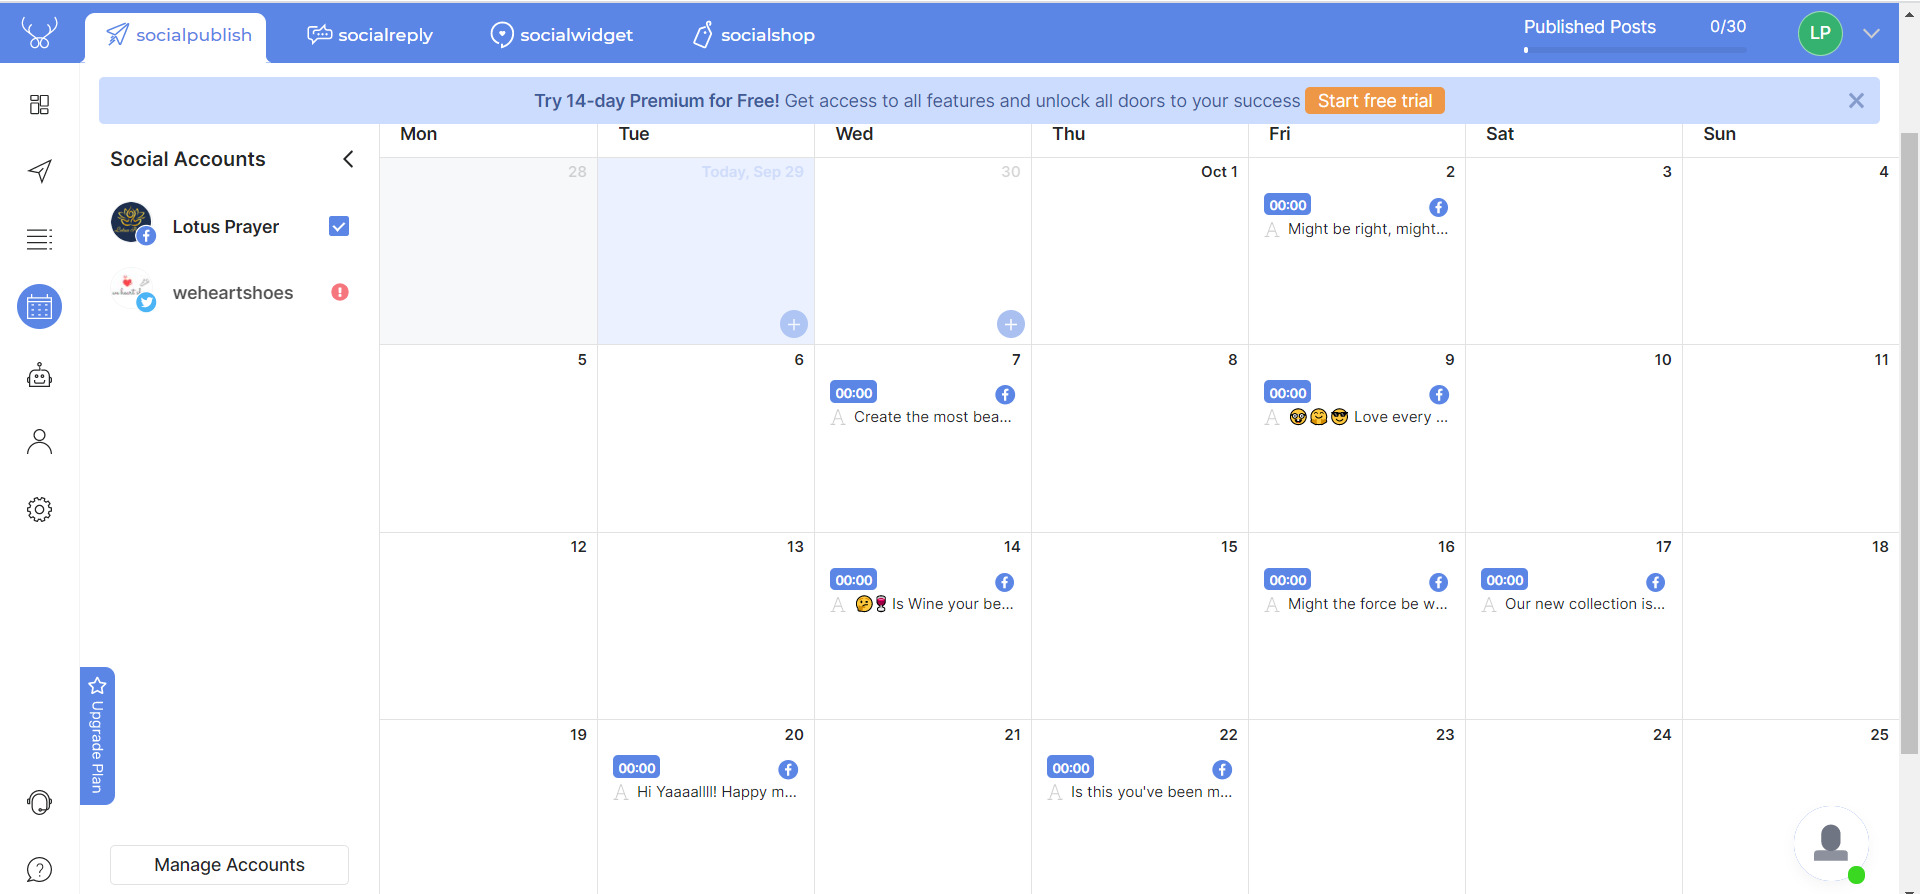 Socialpublish helps you create a content calendar within a few minutes